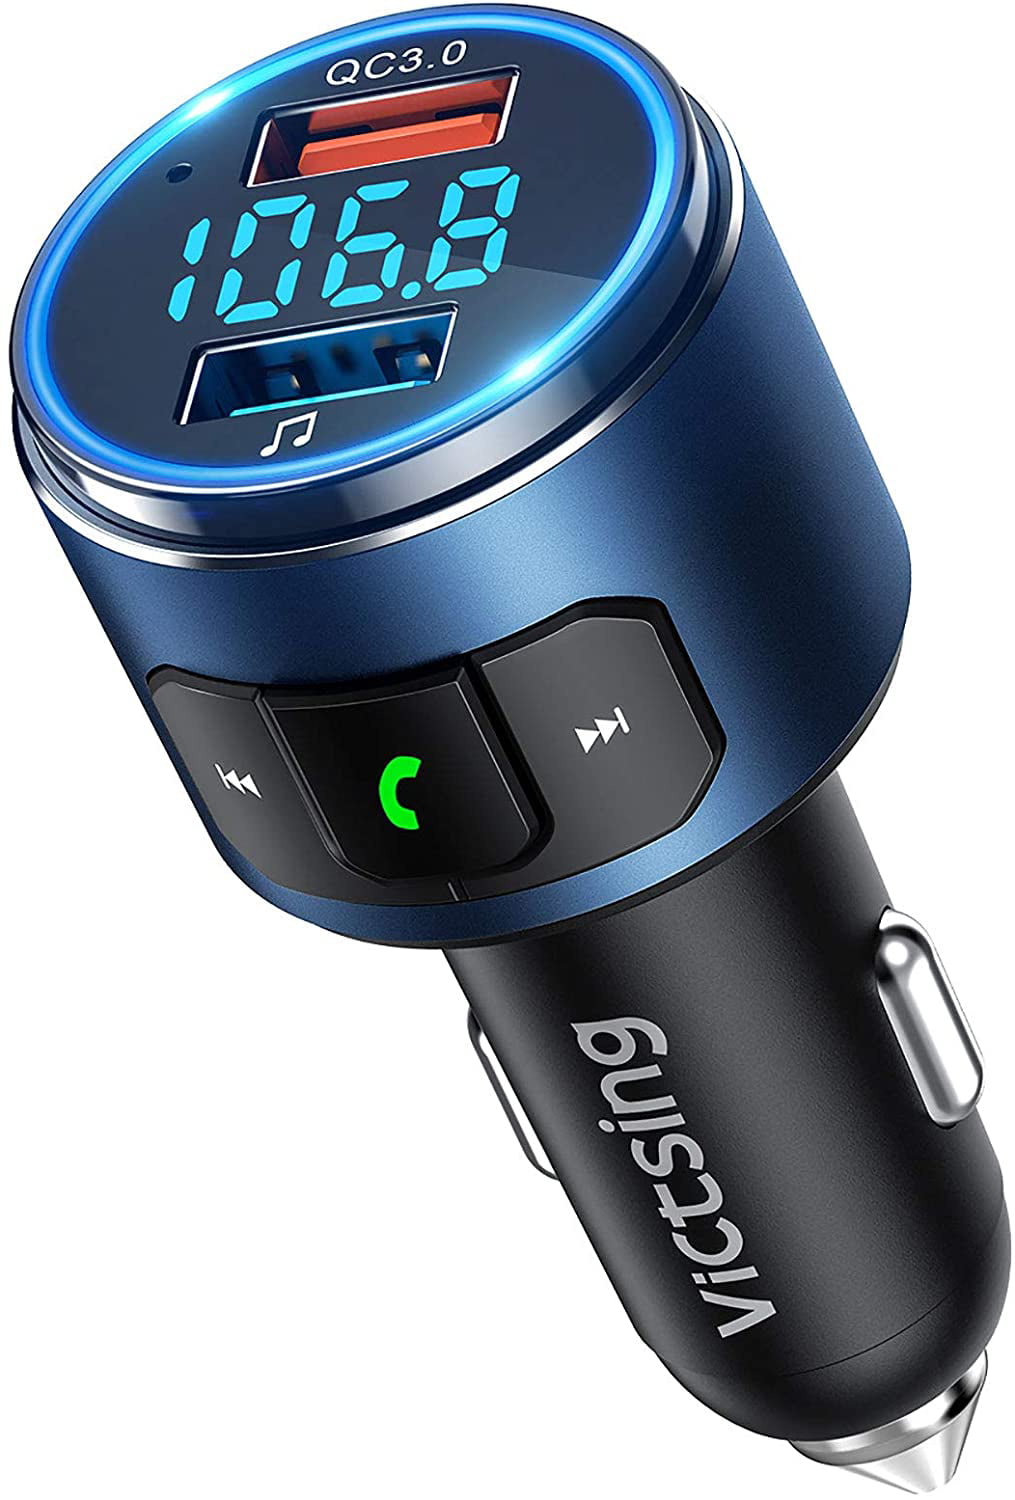 MP3 Player Car Charger Support Hands-free Calling VicTsing FM Transmitter for Car TF Card USB Drive Bluetooth 5.0 Car Radio Audio Adapter with QC3.0 Quick Charge & 6 RGB Colorful Light 